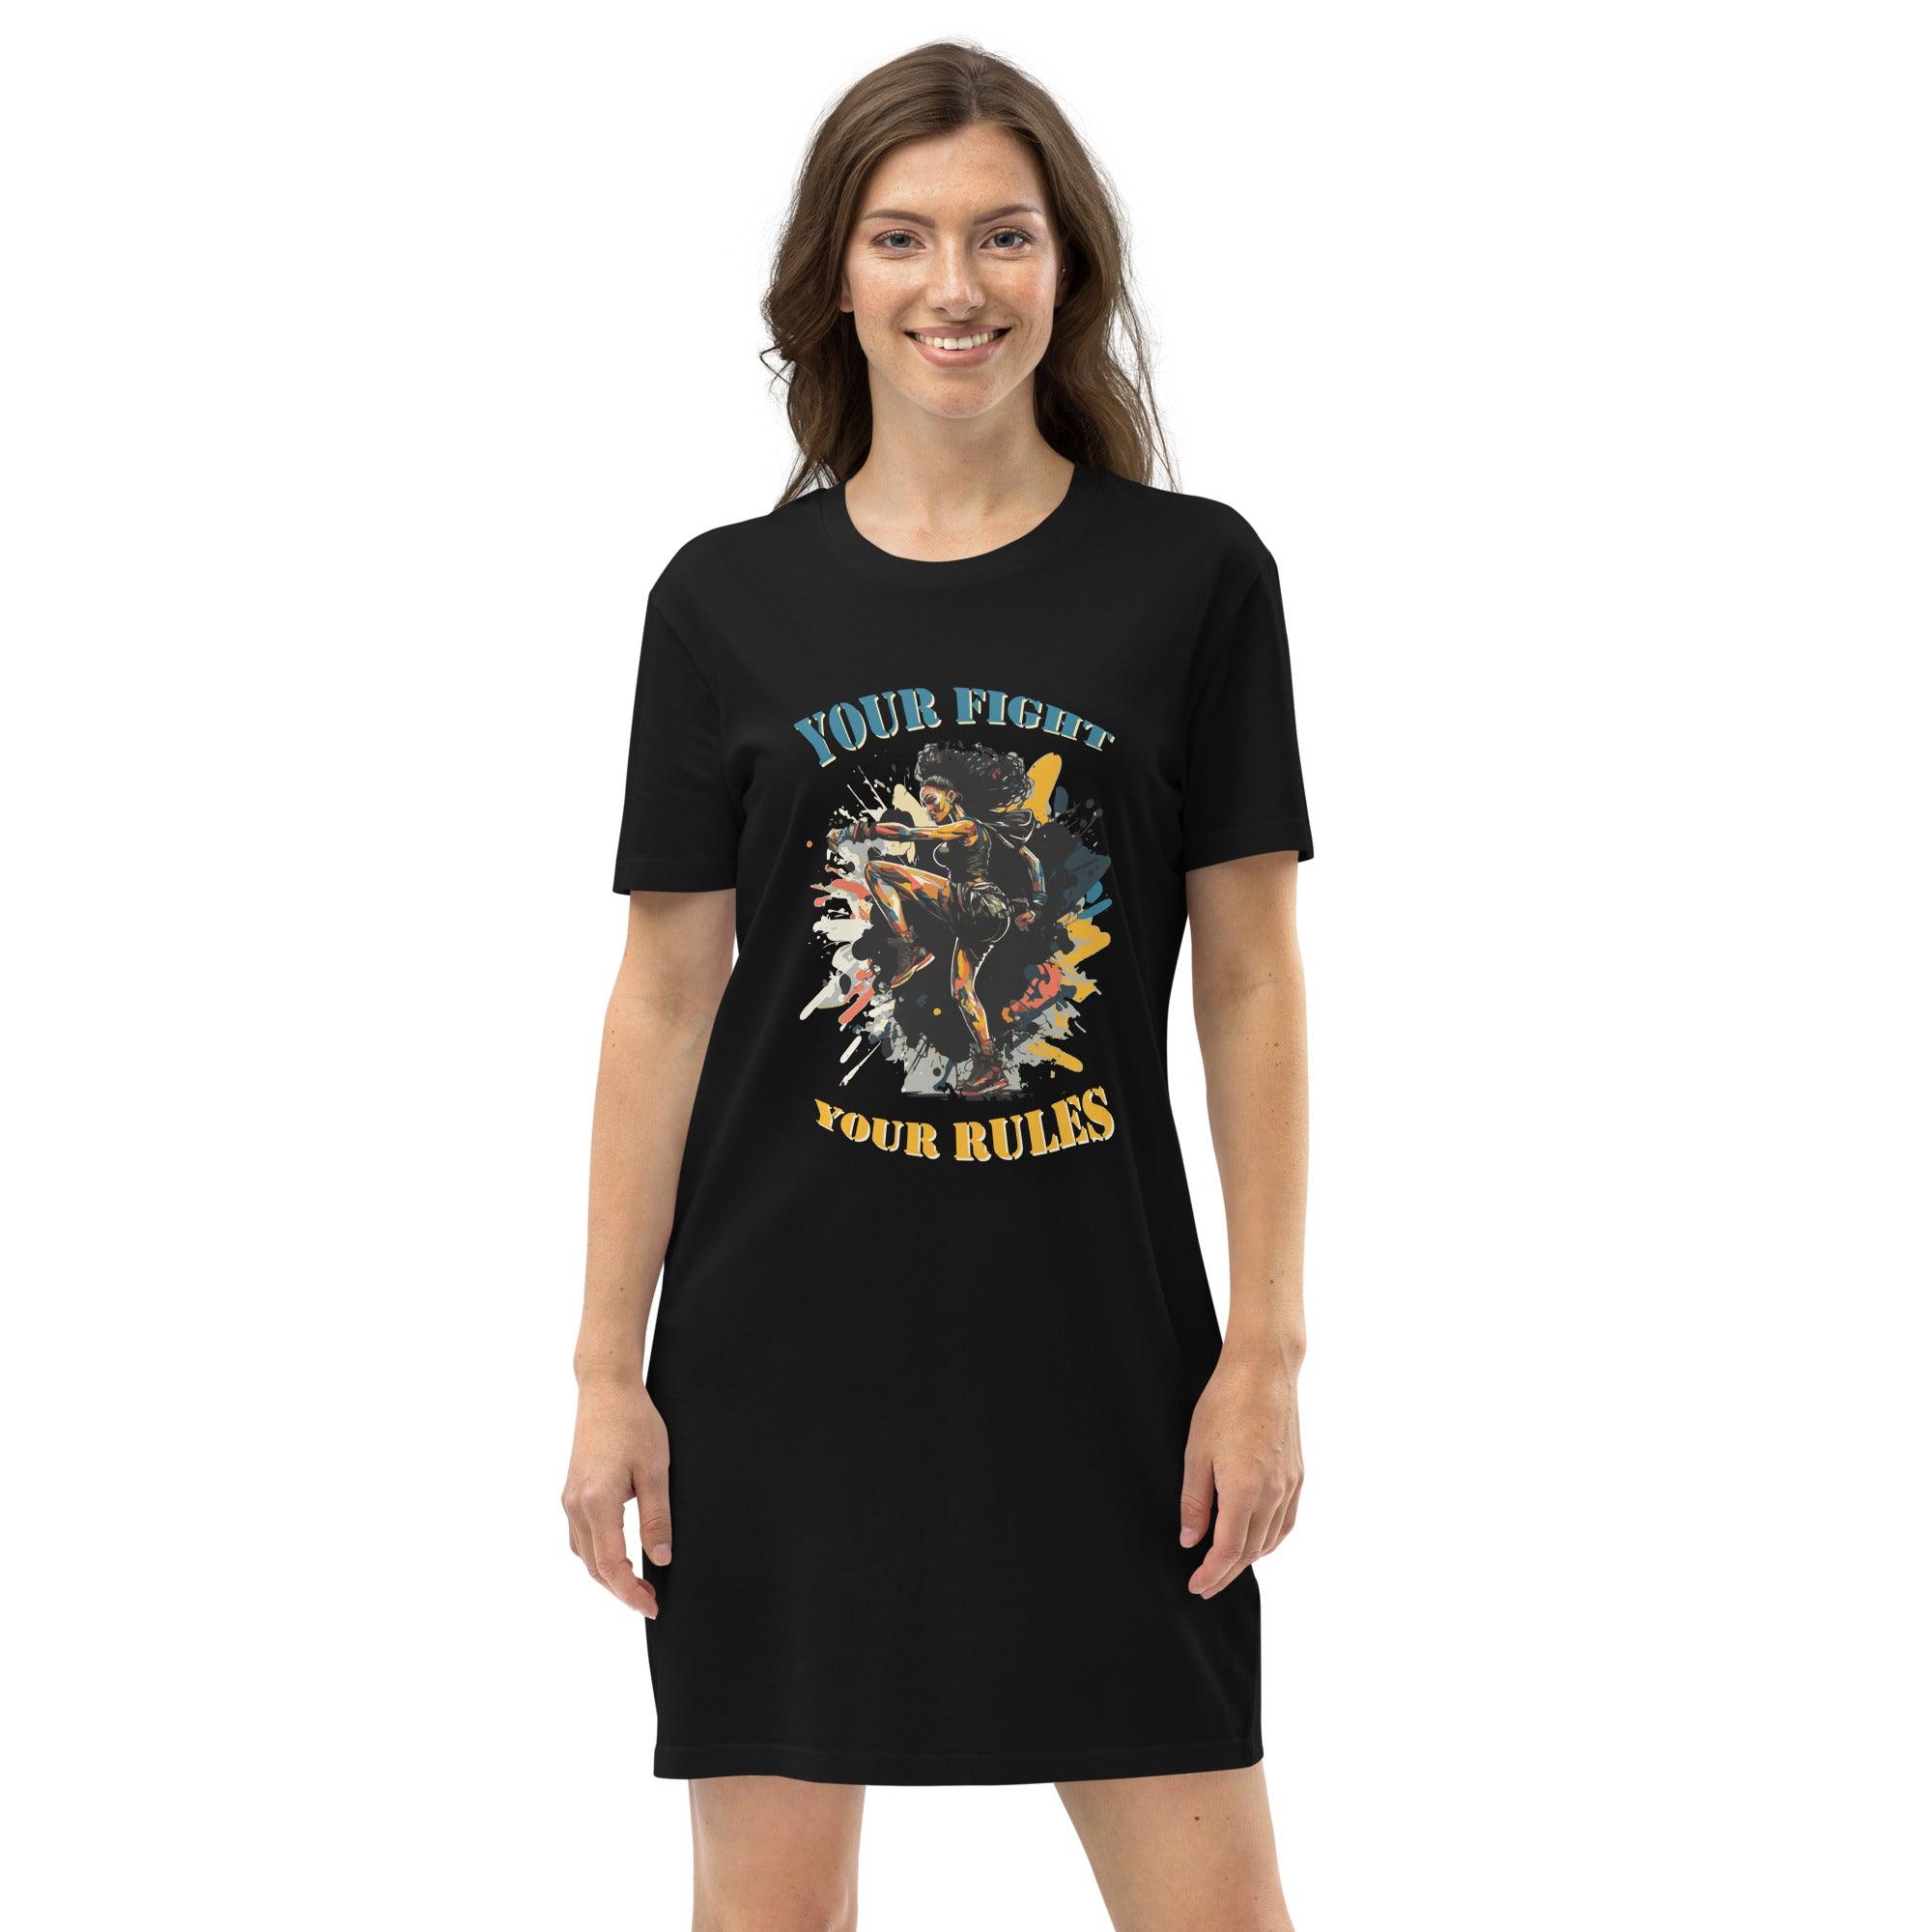 Your Fight Your Rules Organic Cotton T-Shirt Dress - Beyond T-shirts